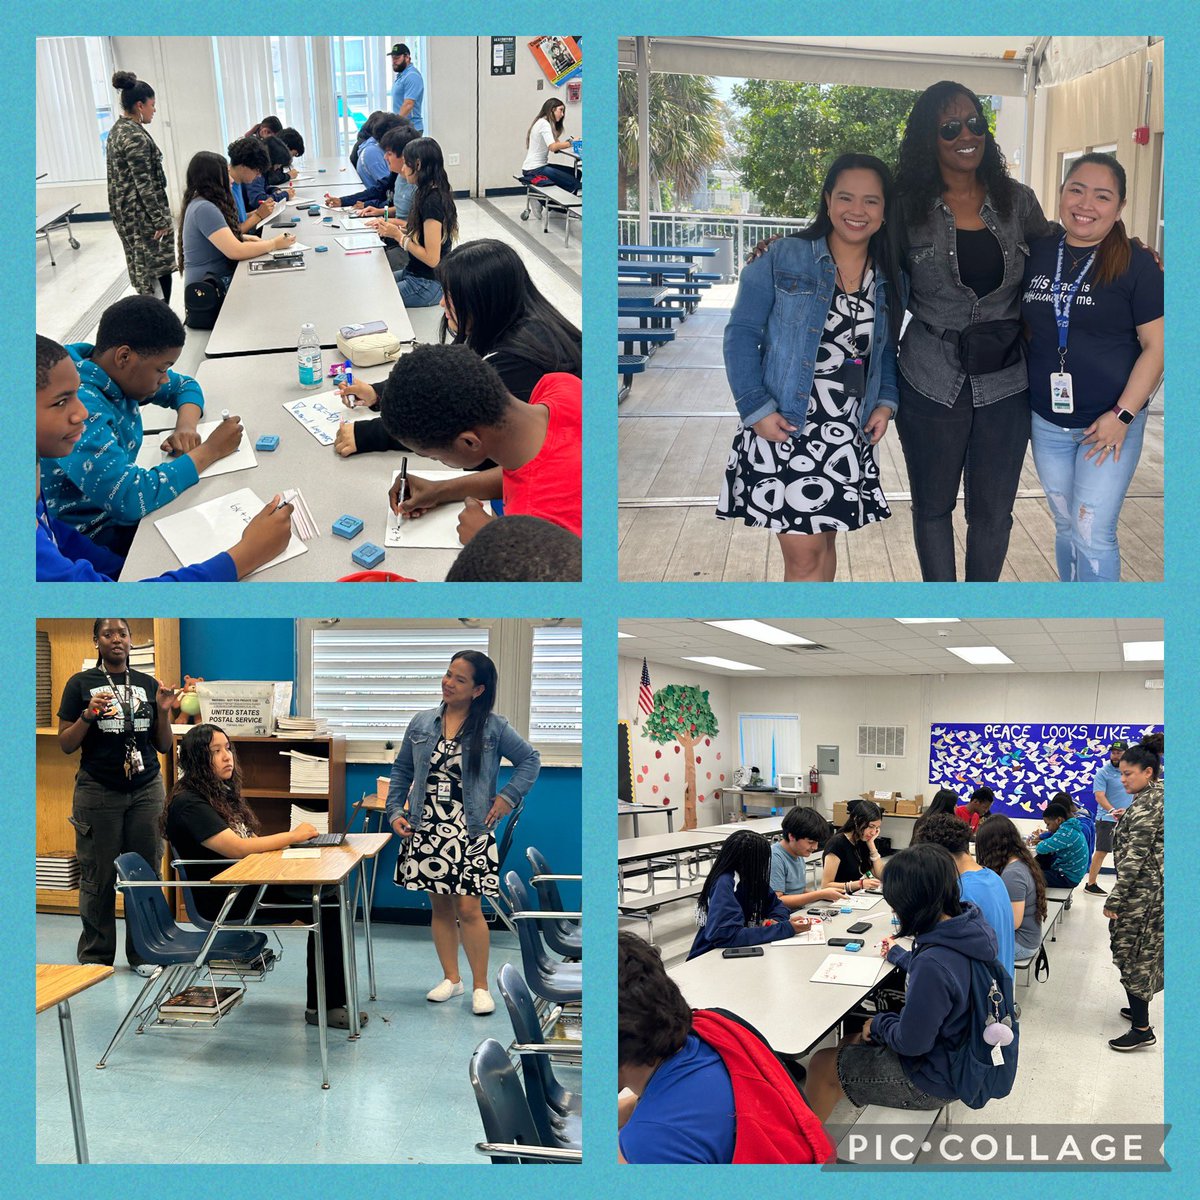 All hands on deck! Thank you Ms. April and Amostique of @FlhsOfficial and Ms. Haniff of @LLMS_Vikings for supporting our Math Camp! @Rickards_JEG @JRickardsMiddle @KaraPluchino @rmsmrdavis @DrFlem71